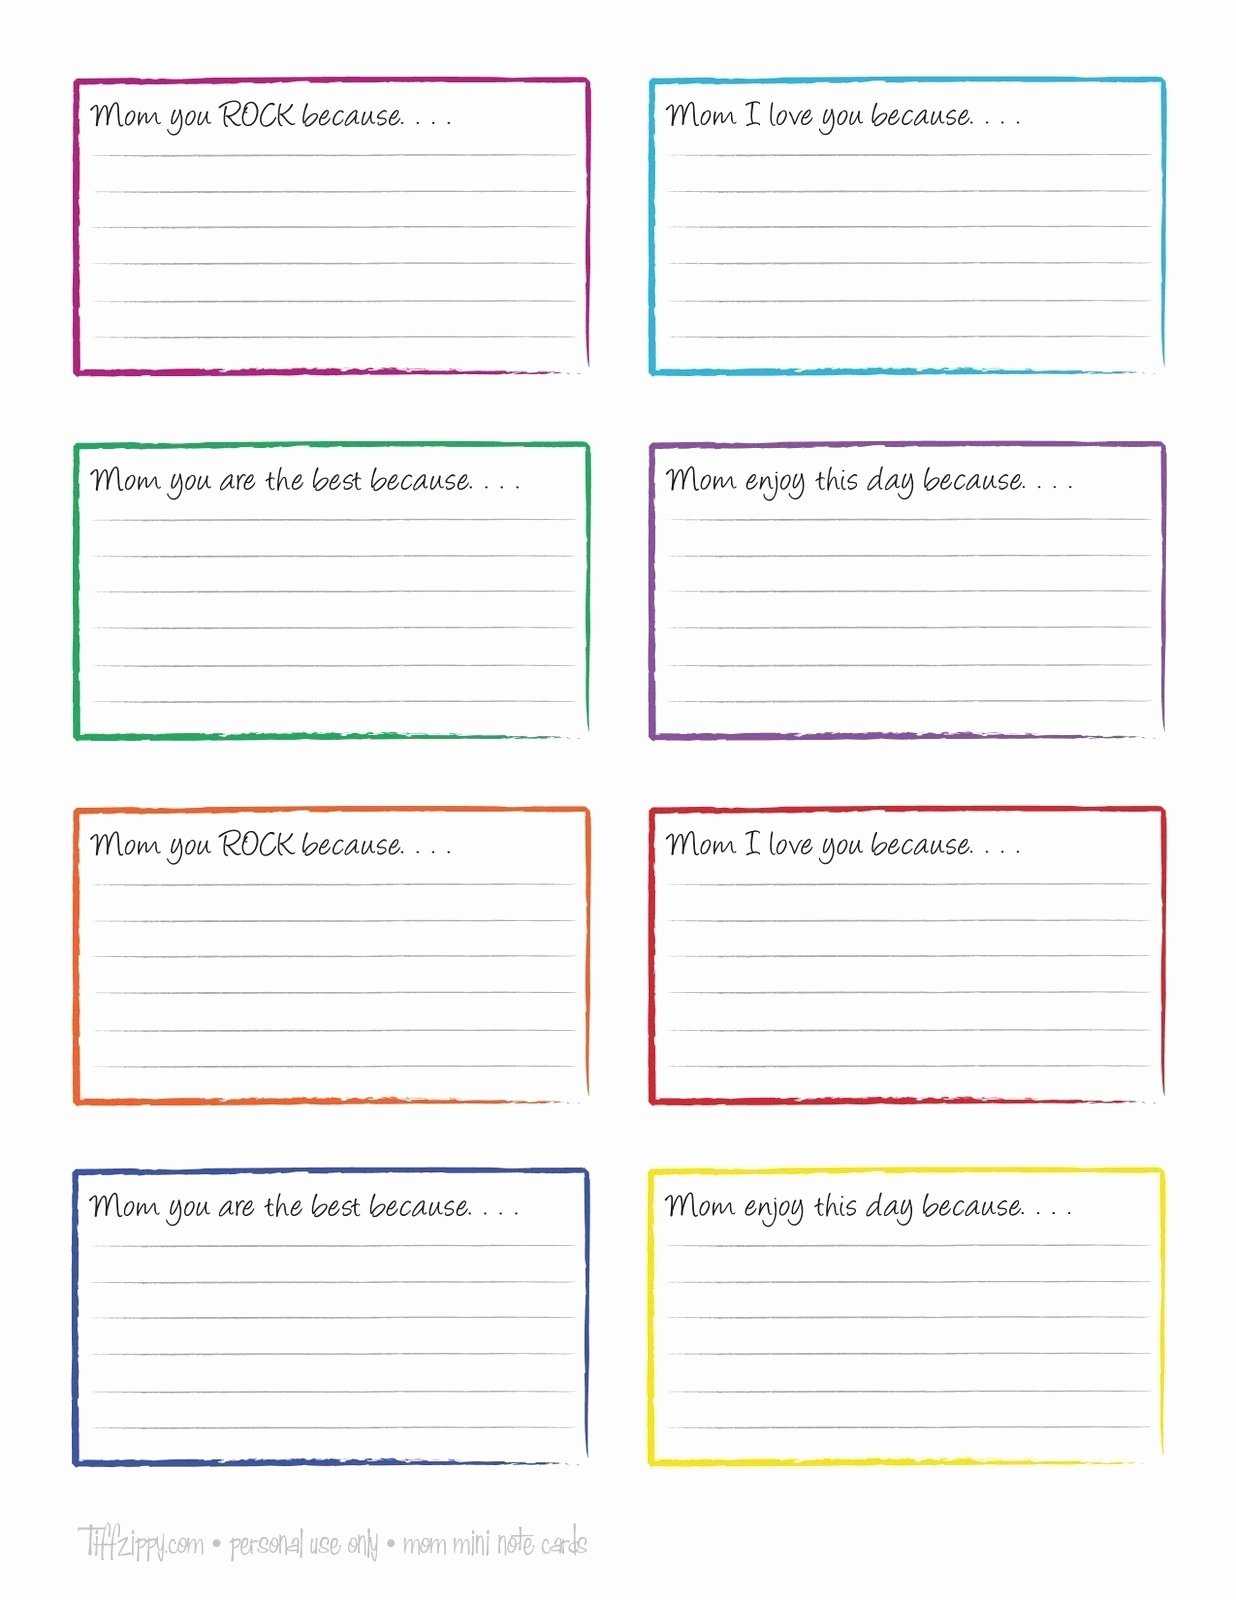 30 Note Card Template Google Docs | Pryncepality With Blank Index Card Template